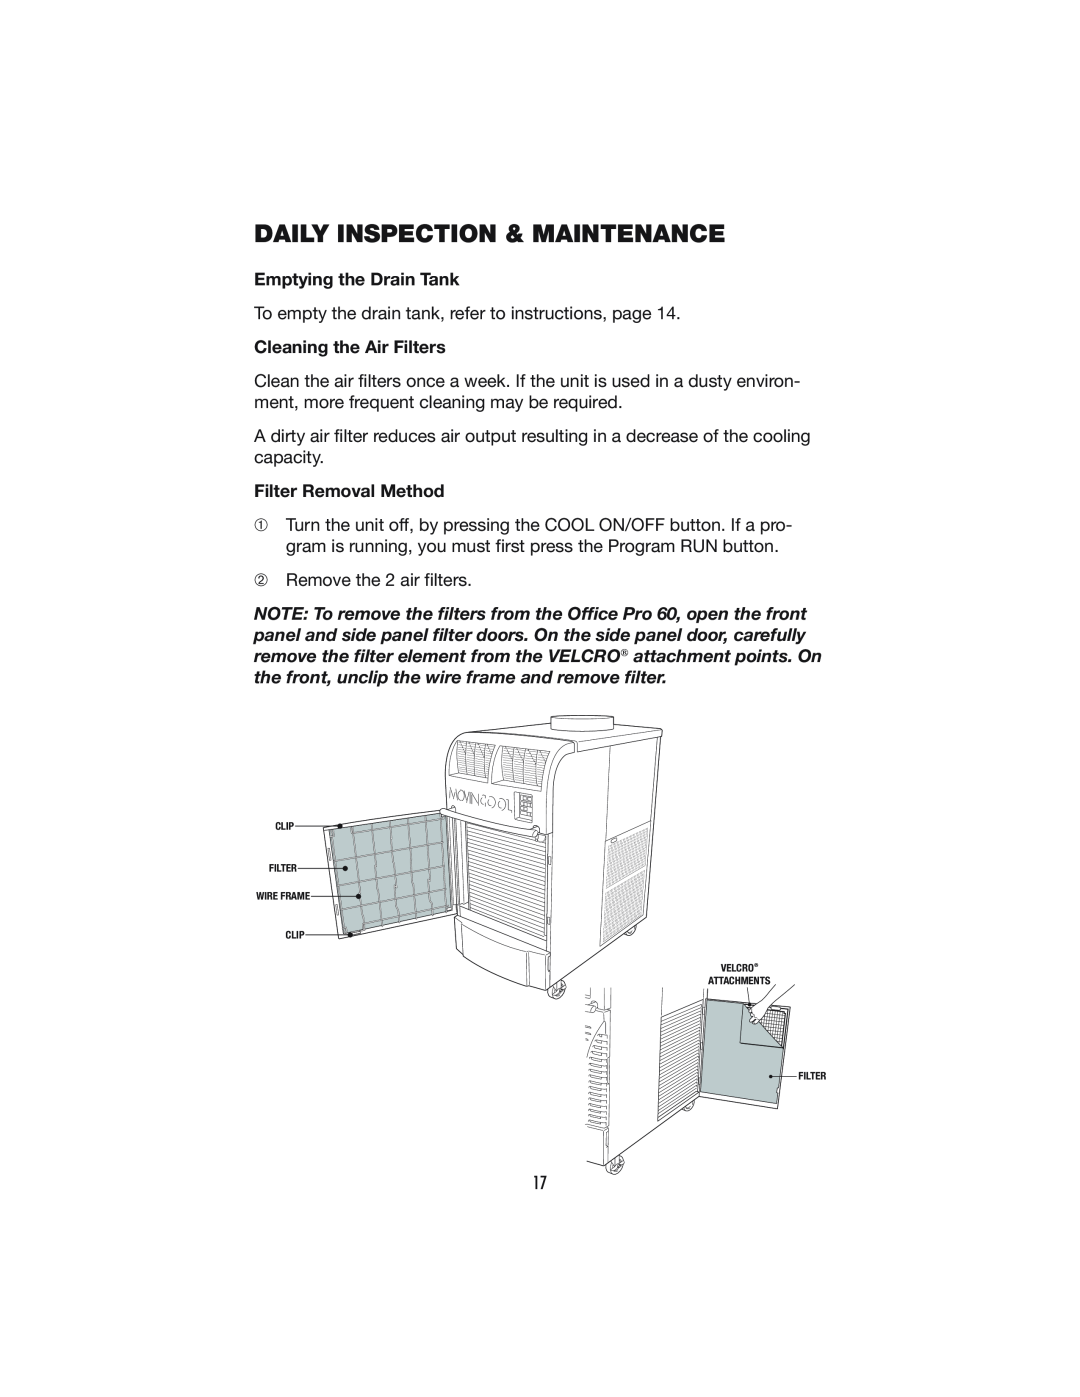 Denso PRO 60 Daily Inspection & Maintenance, Emptying the Drain Tank, Cleaning the Air Filters, Filter Removal Method 